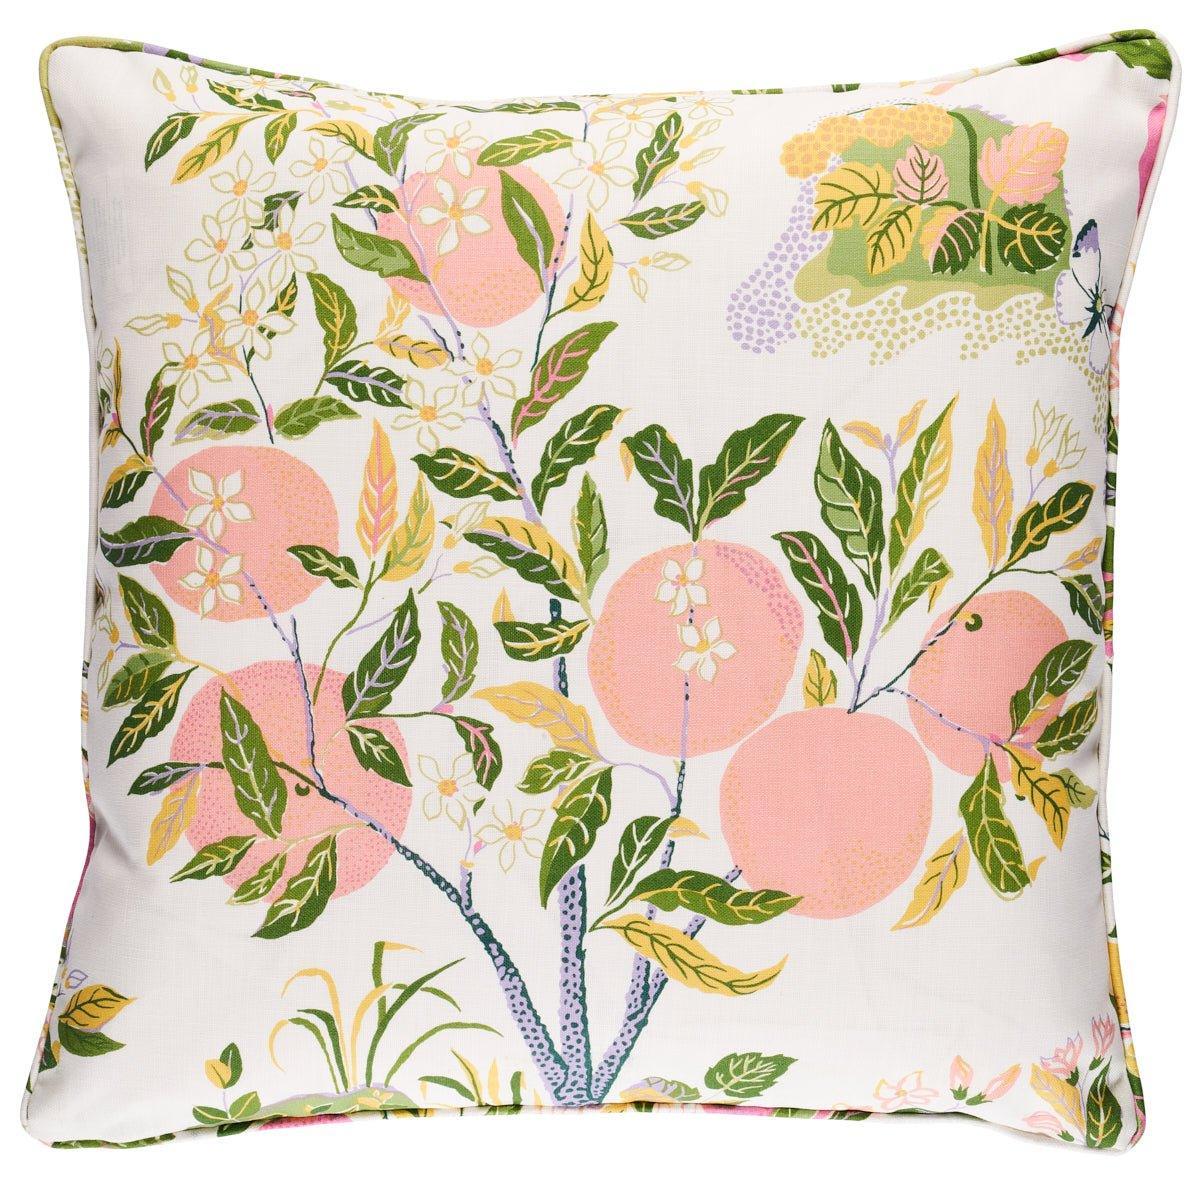 https://www.wellappointedhouse.com/cdn/shop/files/pink-citrus-garden-indoor-outdoor-square-throw-pillow-pillows-the-well-appointed-house-1_2a90b48e-318d-49d1-aa0e-785c5cb482a9.jpg?v=1691691191